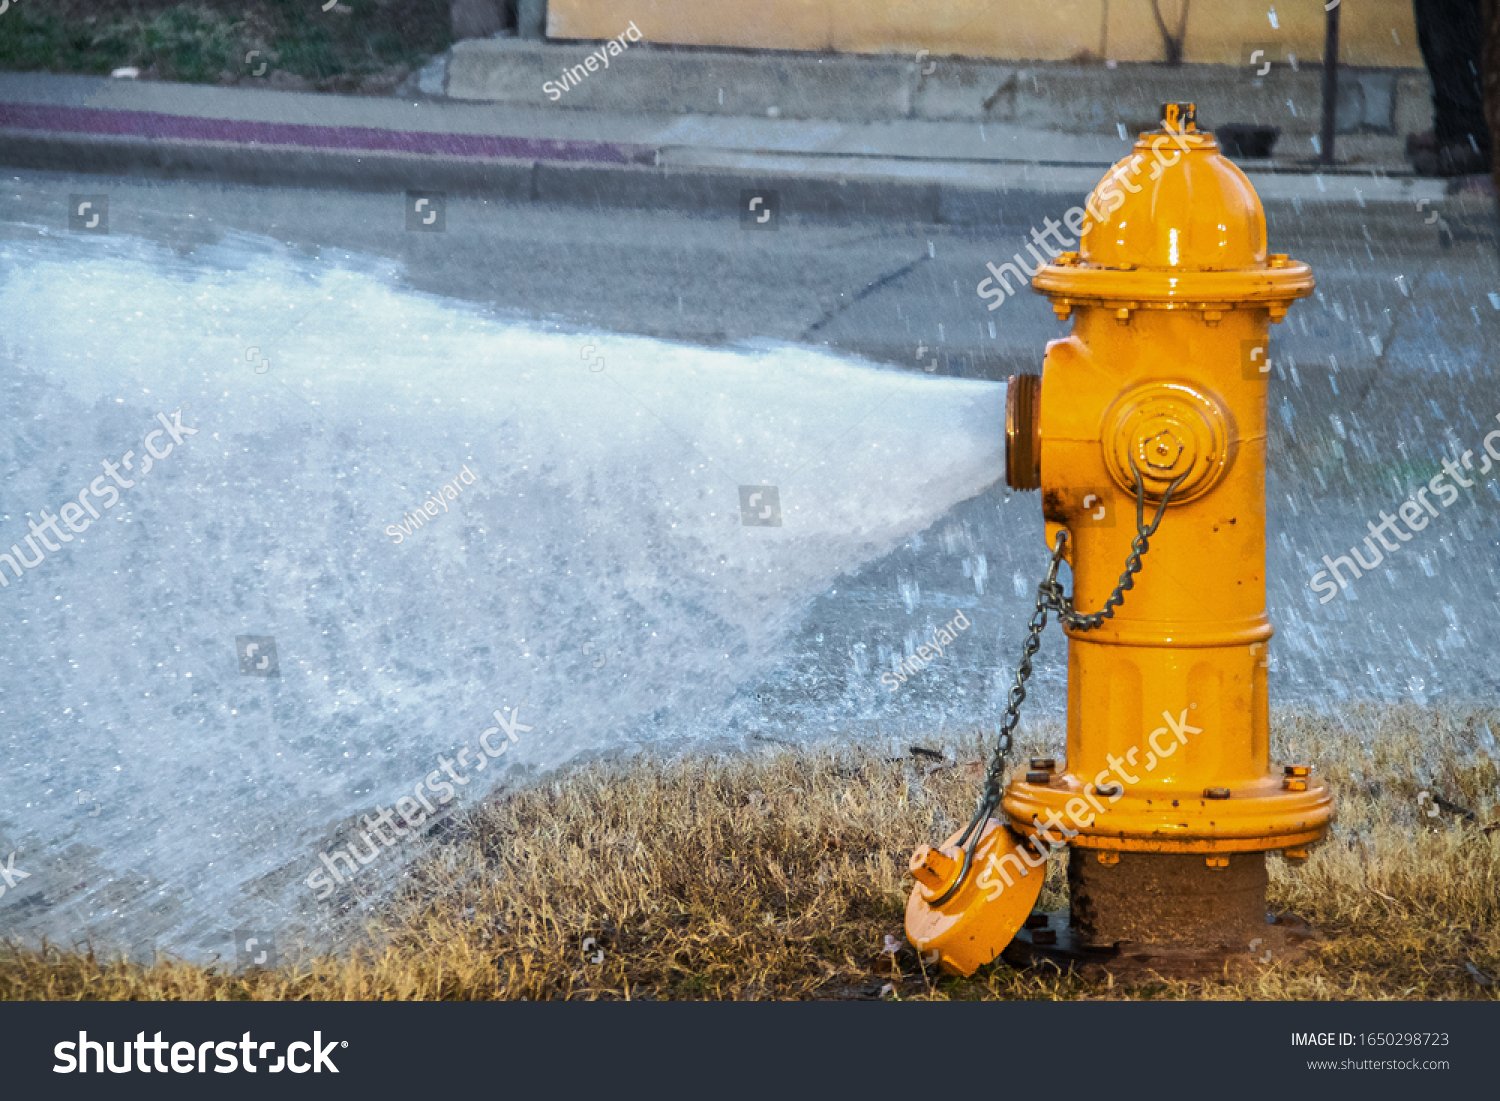 Yellow fire hydrant wide open gushing water onto the street with slightly grainy effect where water is falling back down over the pavement #1650298723